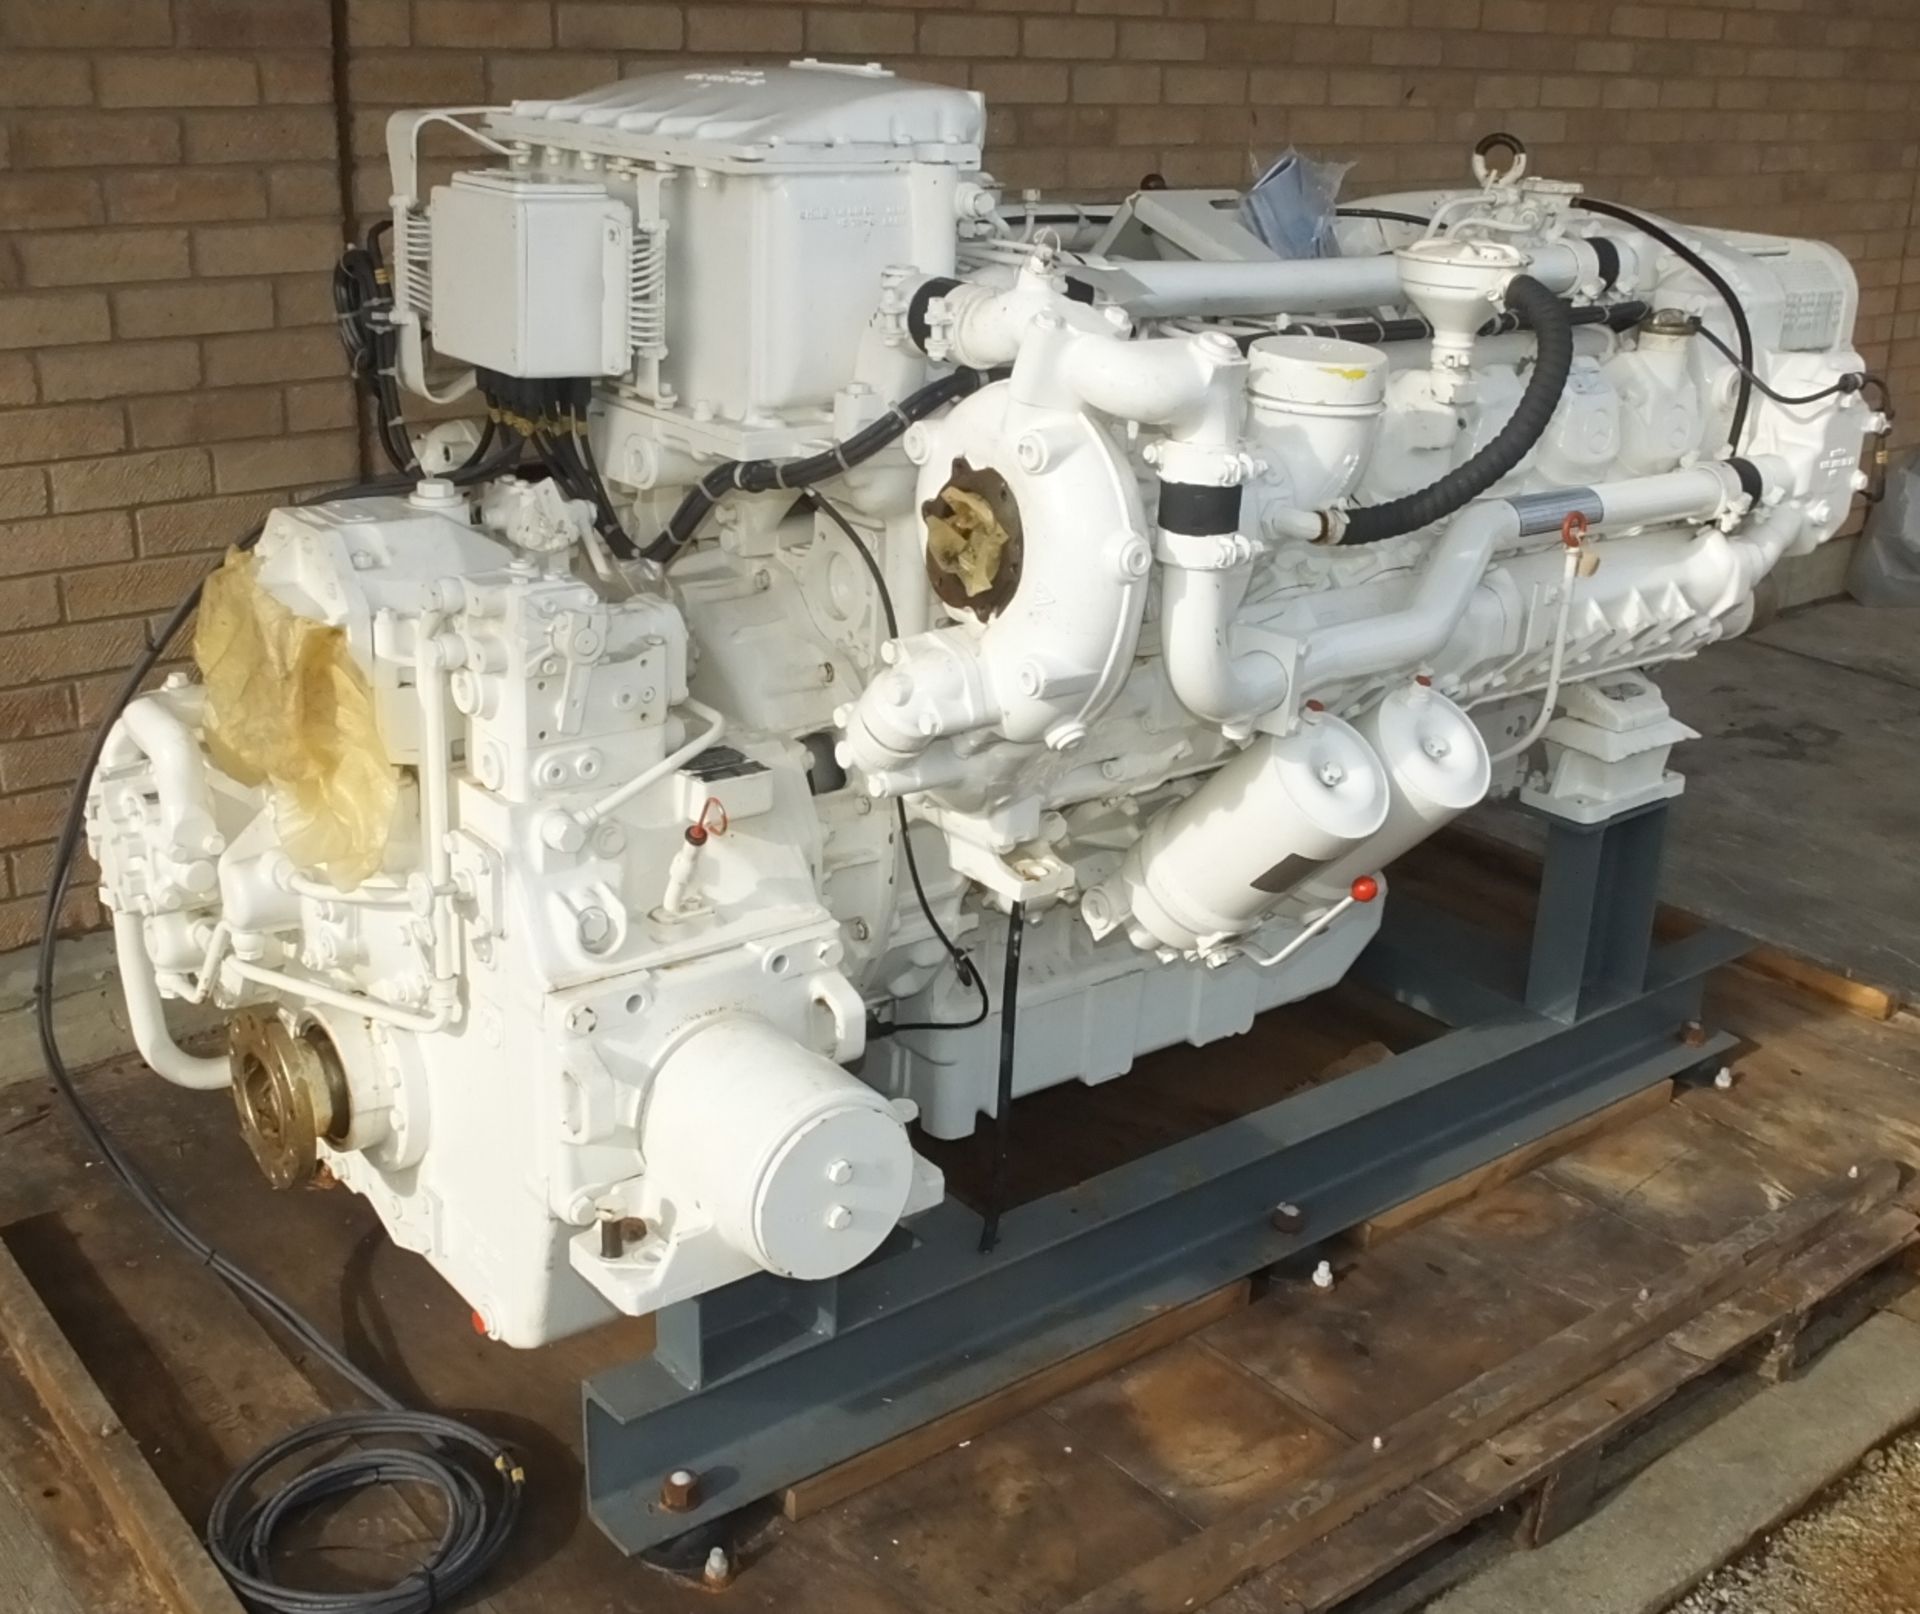 MTU 12V 183 engine - 610kW - 1310HP - 2100 RPM - looks to have only done test hours - very clean